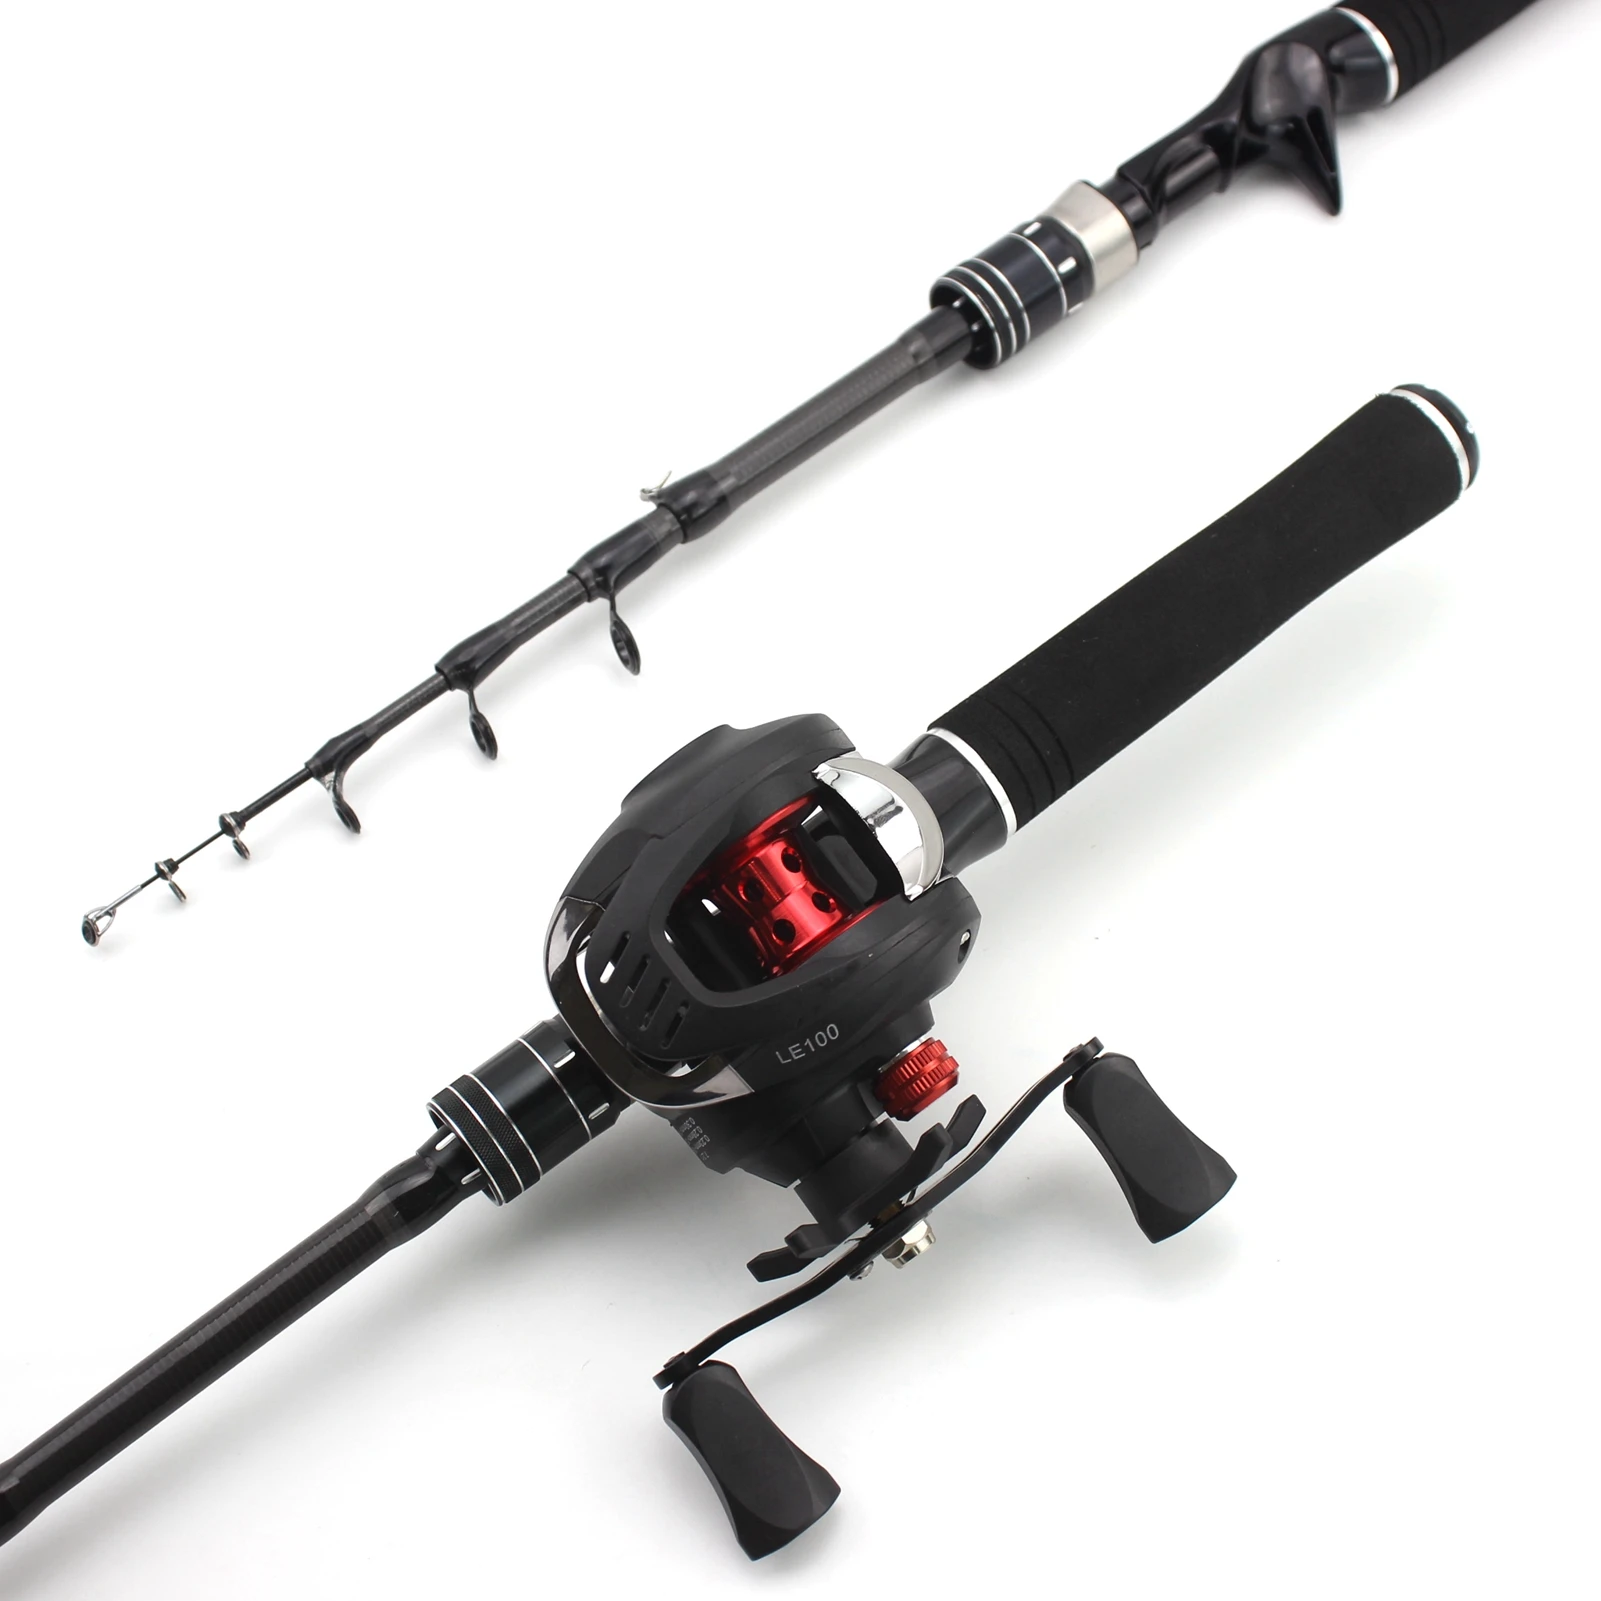 NEW 1.5M 1.8M ul fishing rod Carbon Casting Rod and Reel set